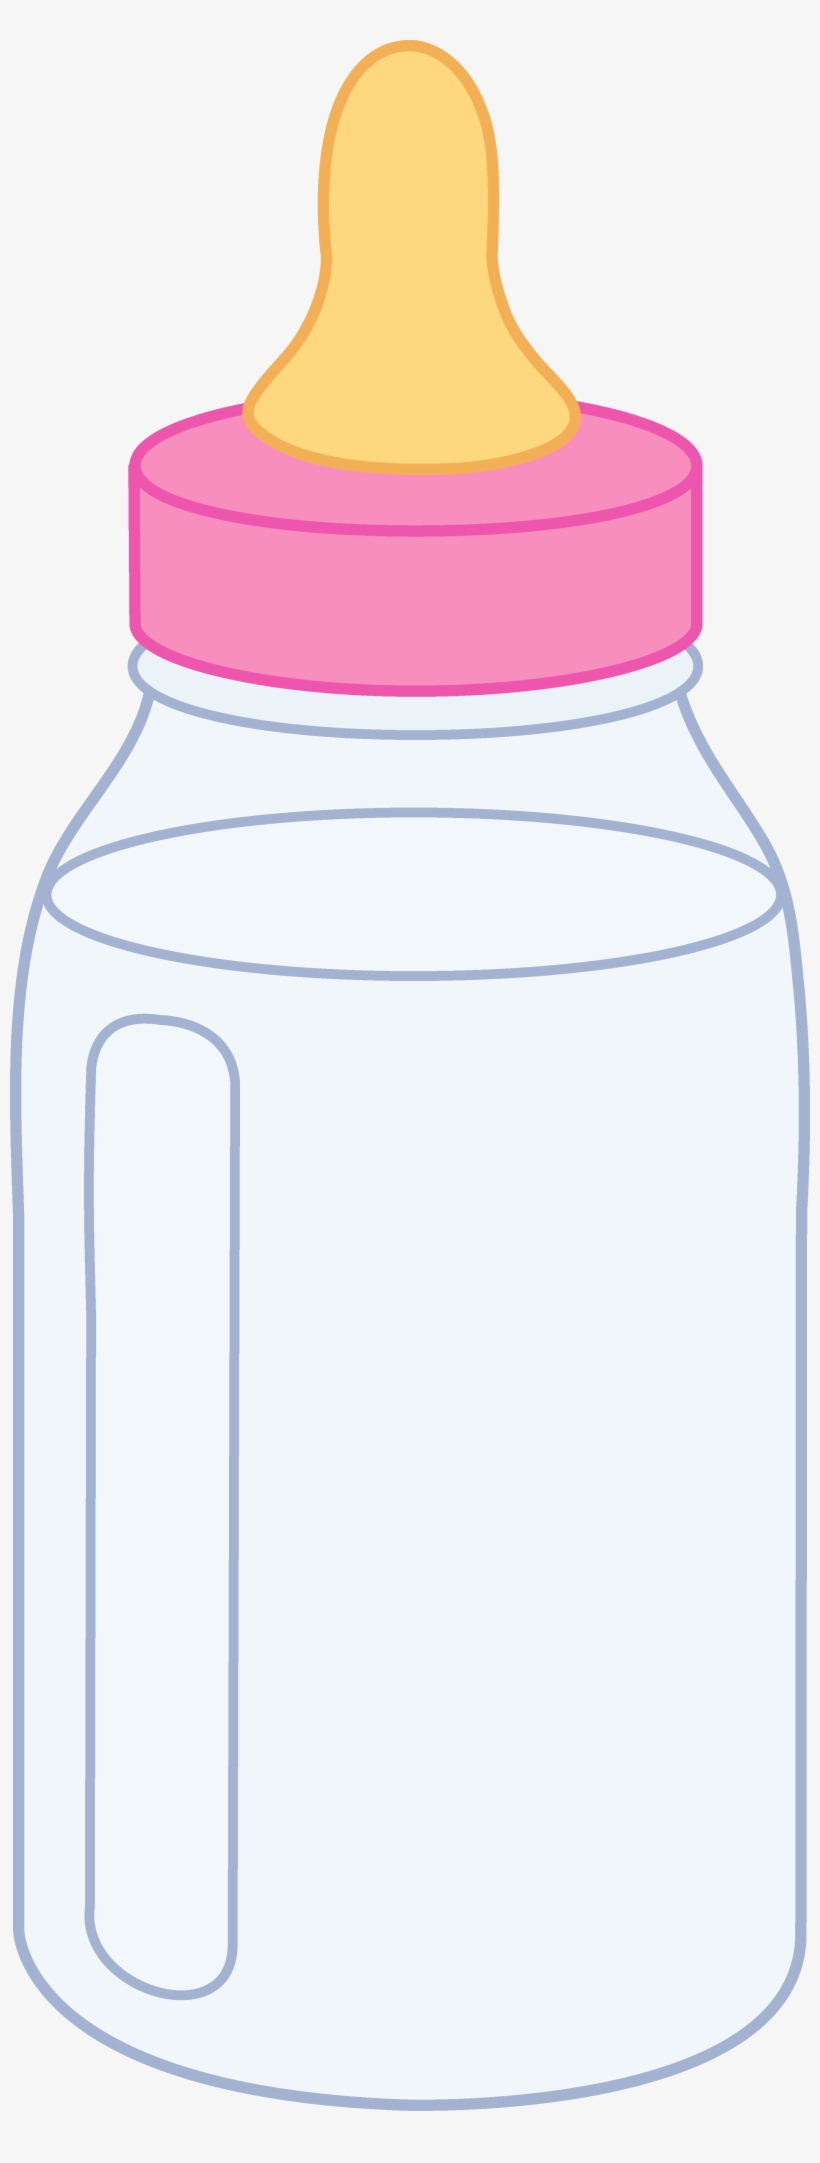 Pink Baby Bottle Clipart.